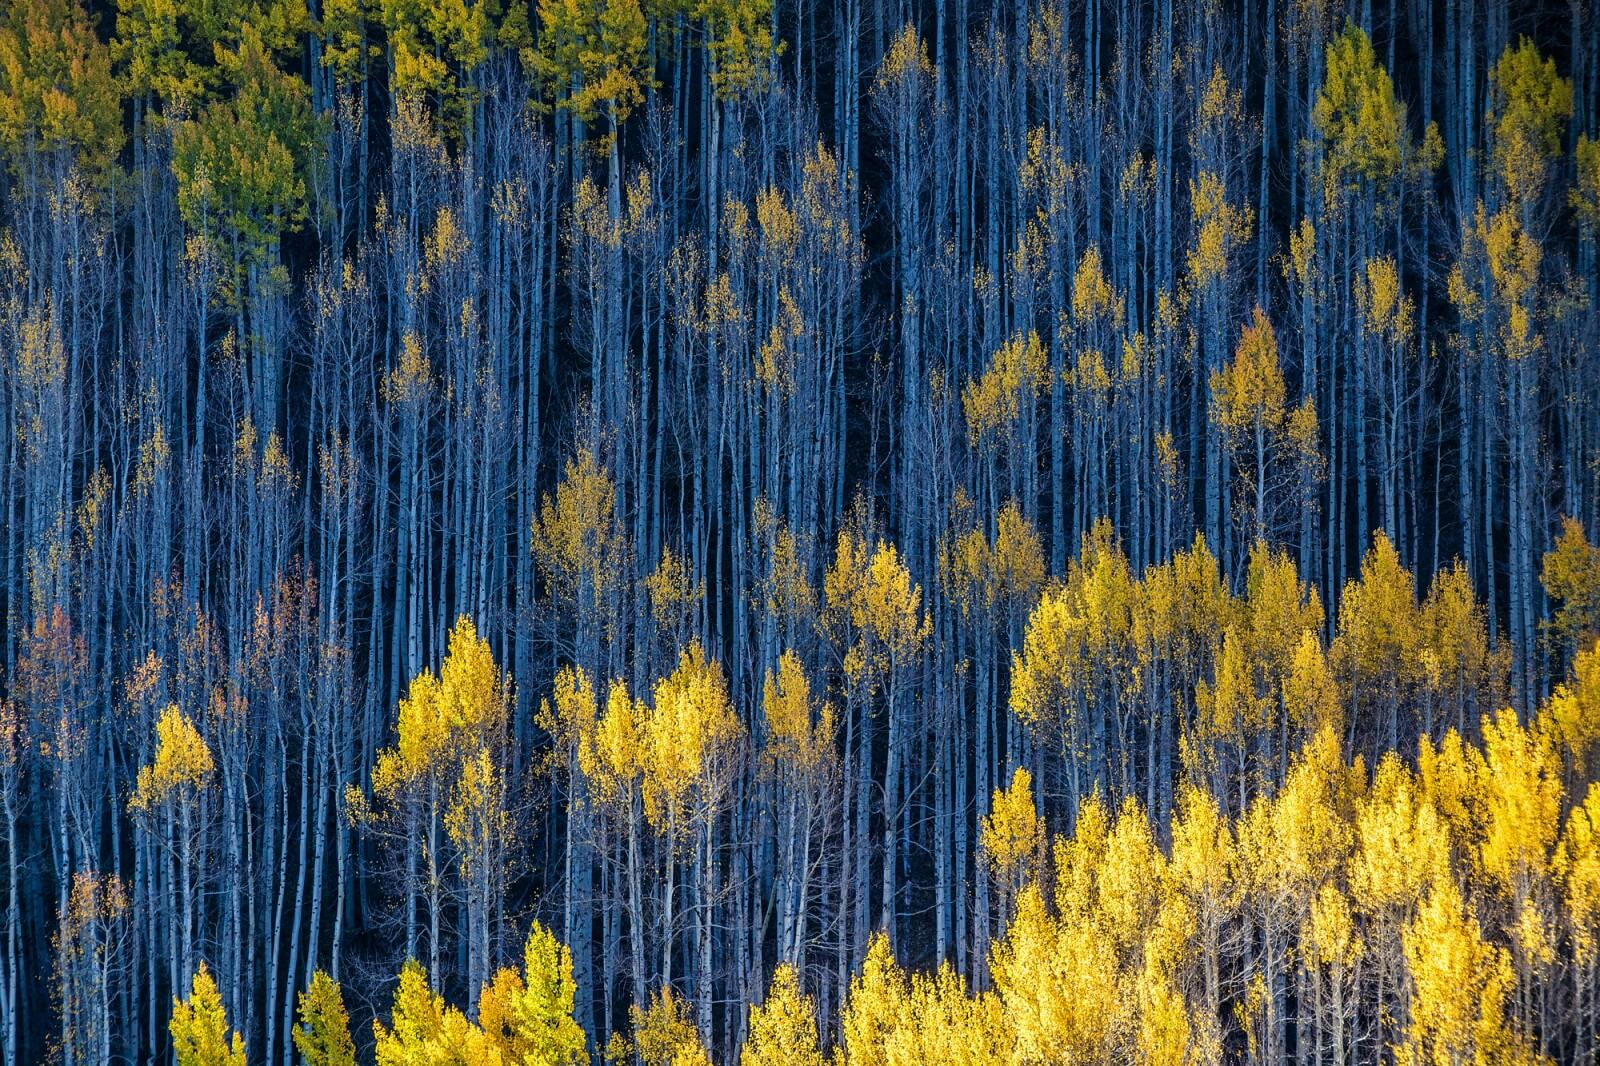 Abstractions from Aspens